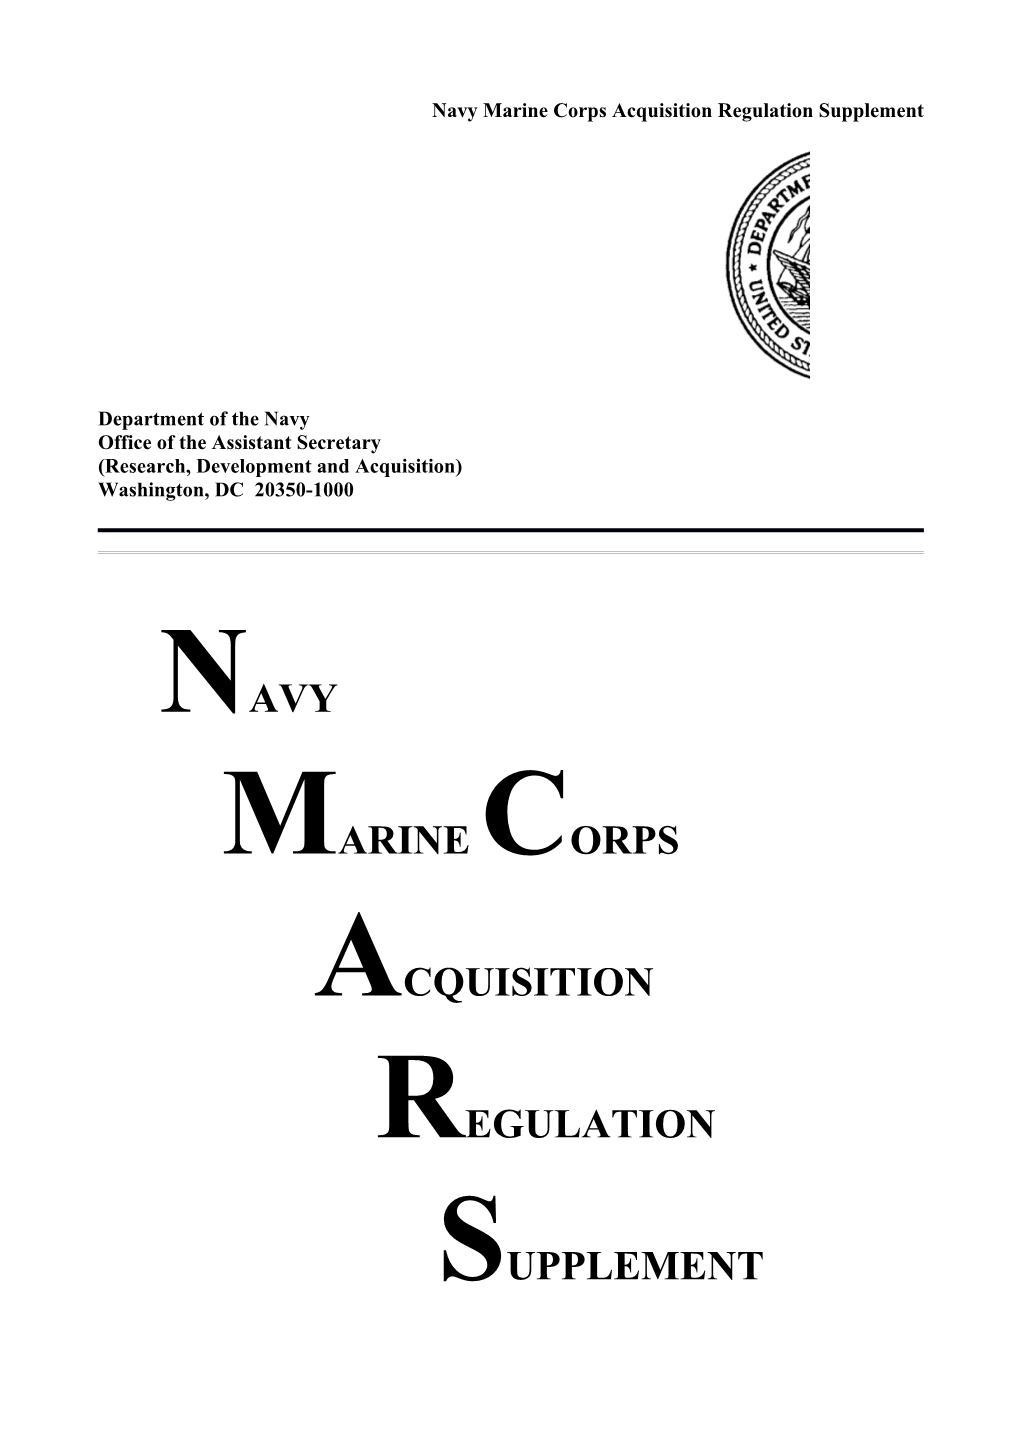 Navy Marine Corps Acquisition Regulation Supplement (NMCARS) (September 2013) (Updated